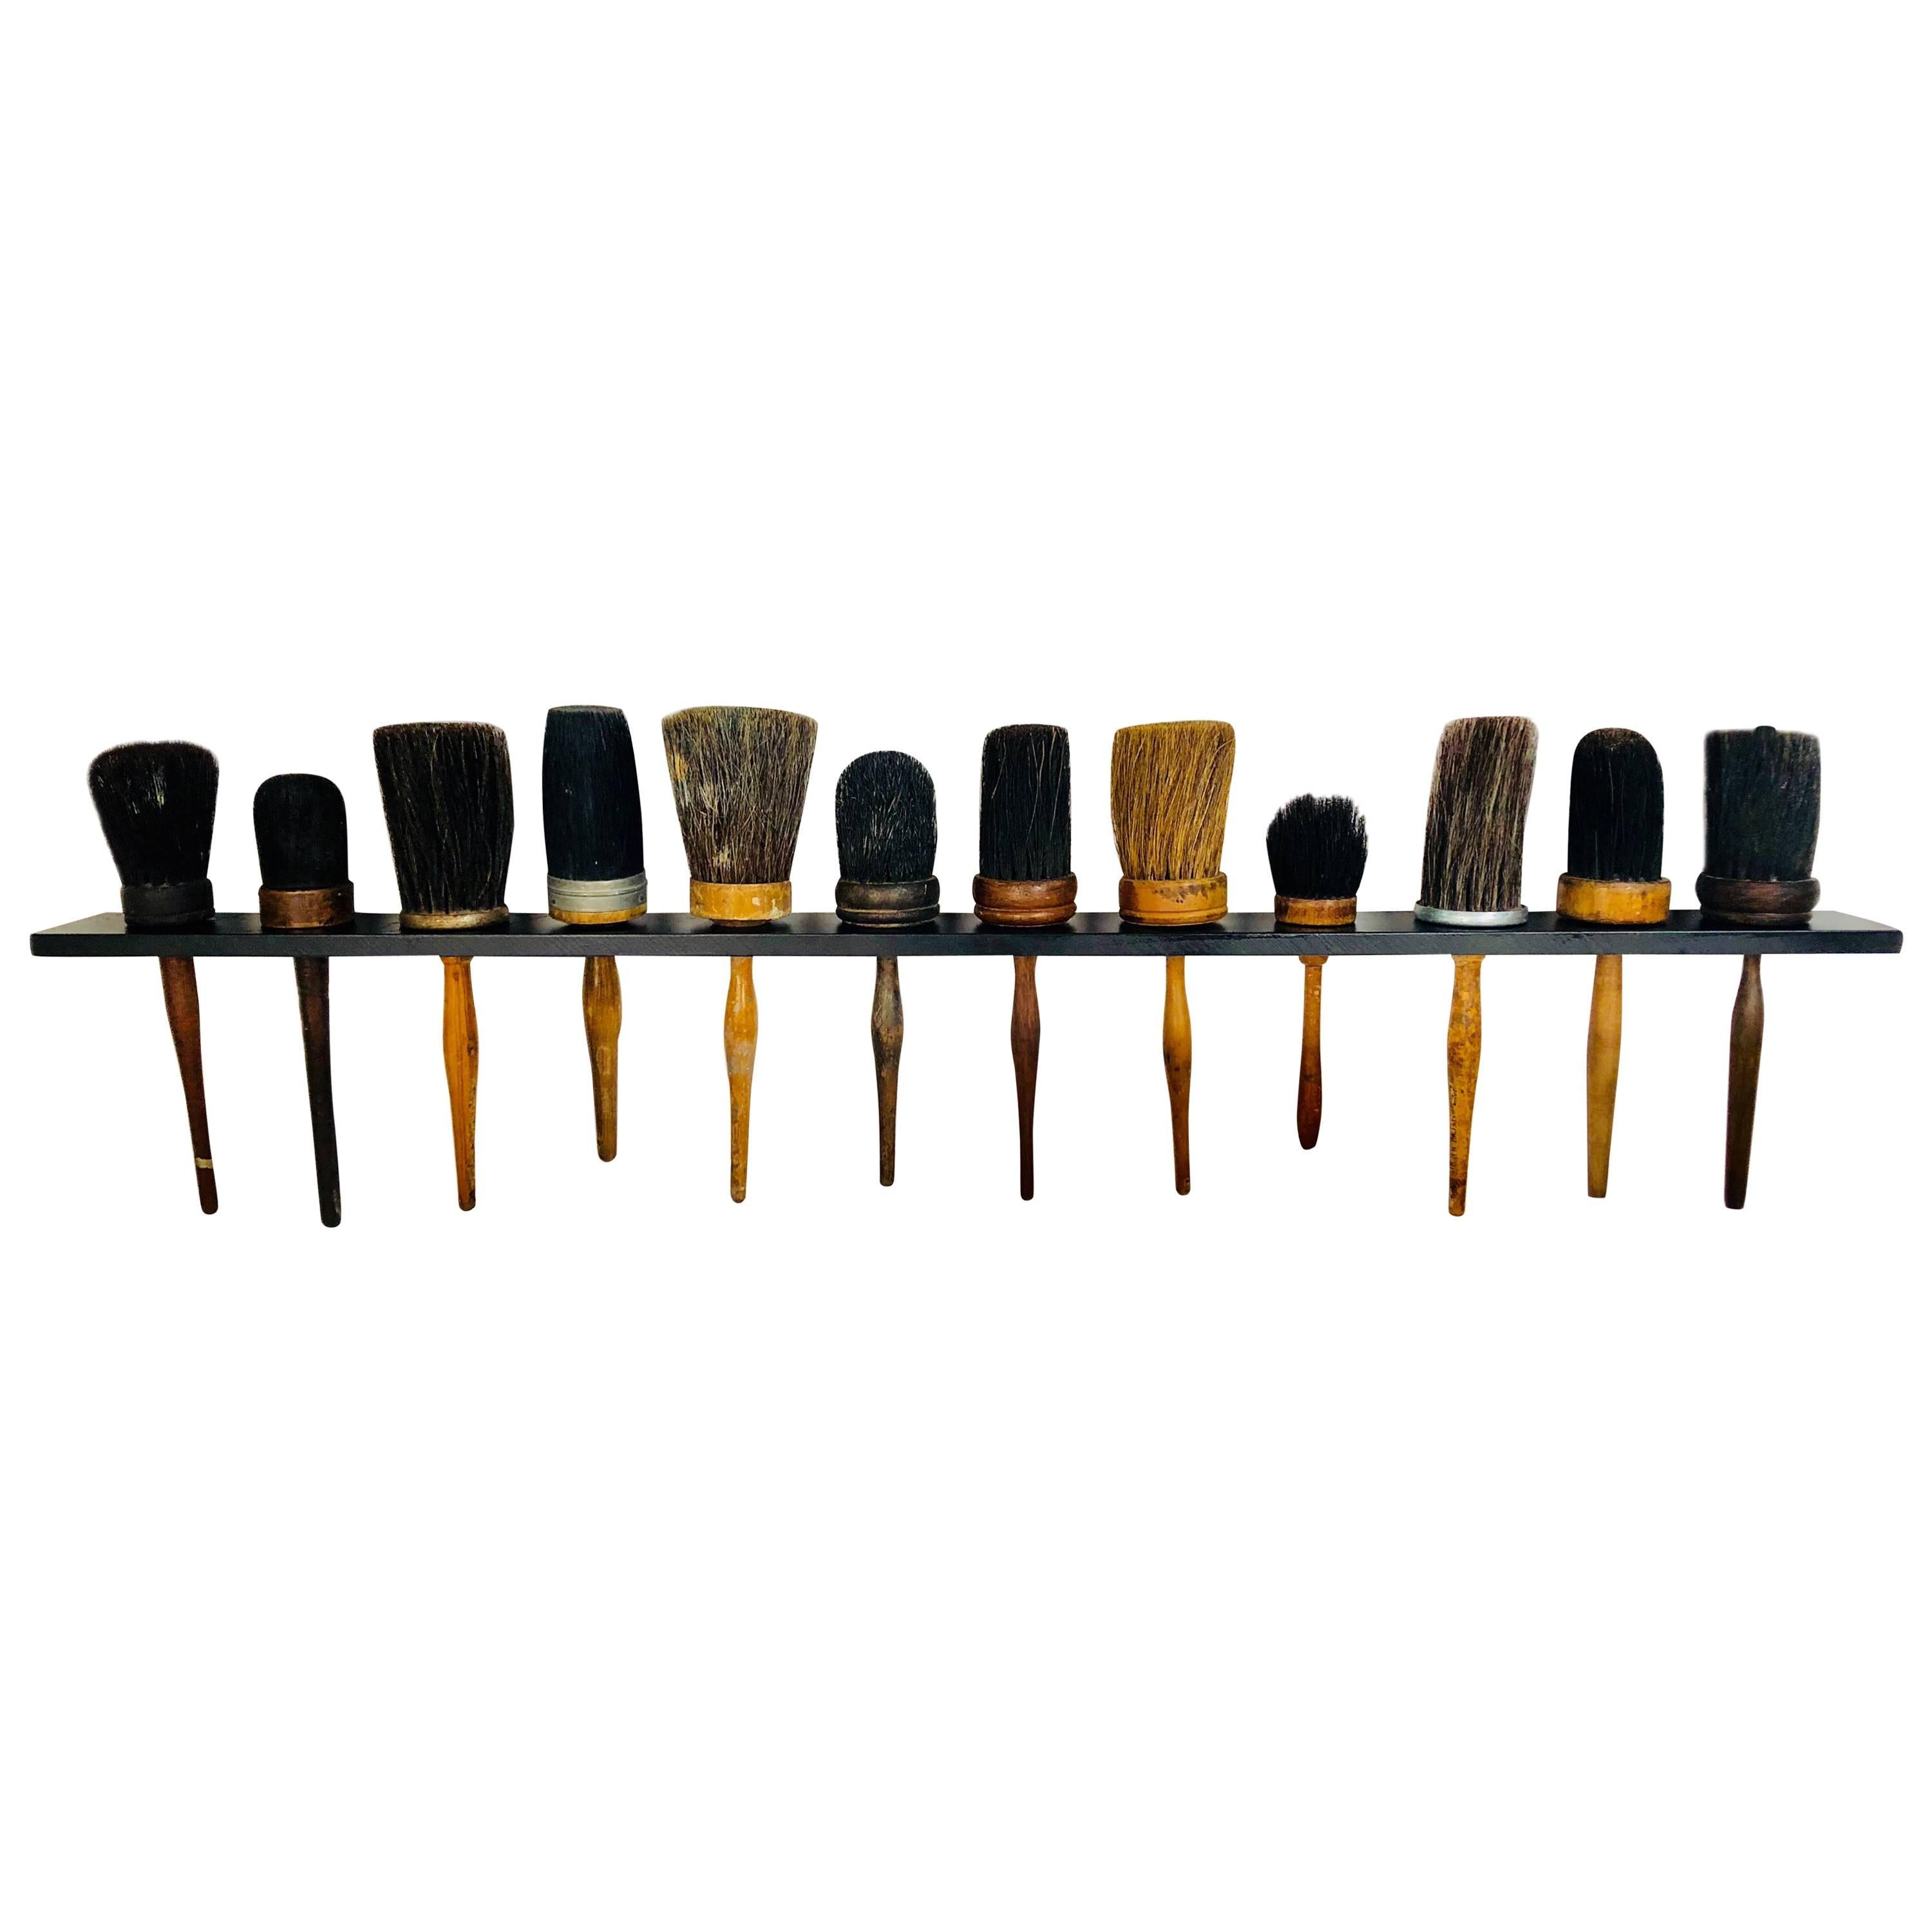 Collection of 12 Antique Shaker Style Turned Wood Handle Horse Hair Brushes